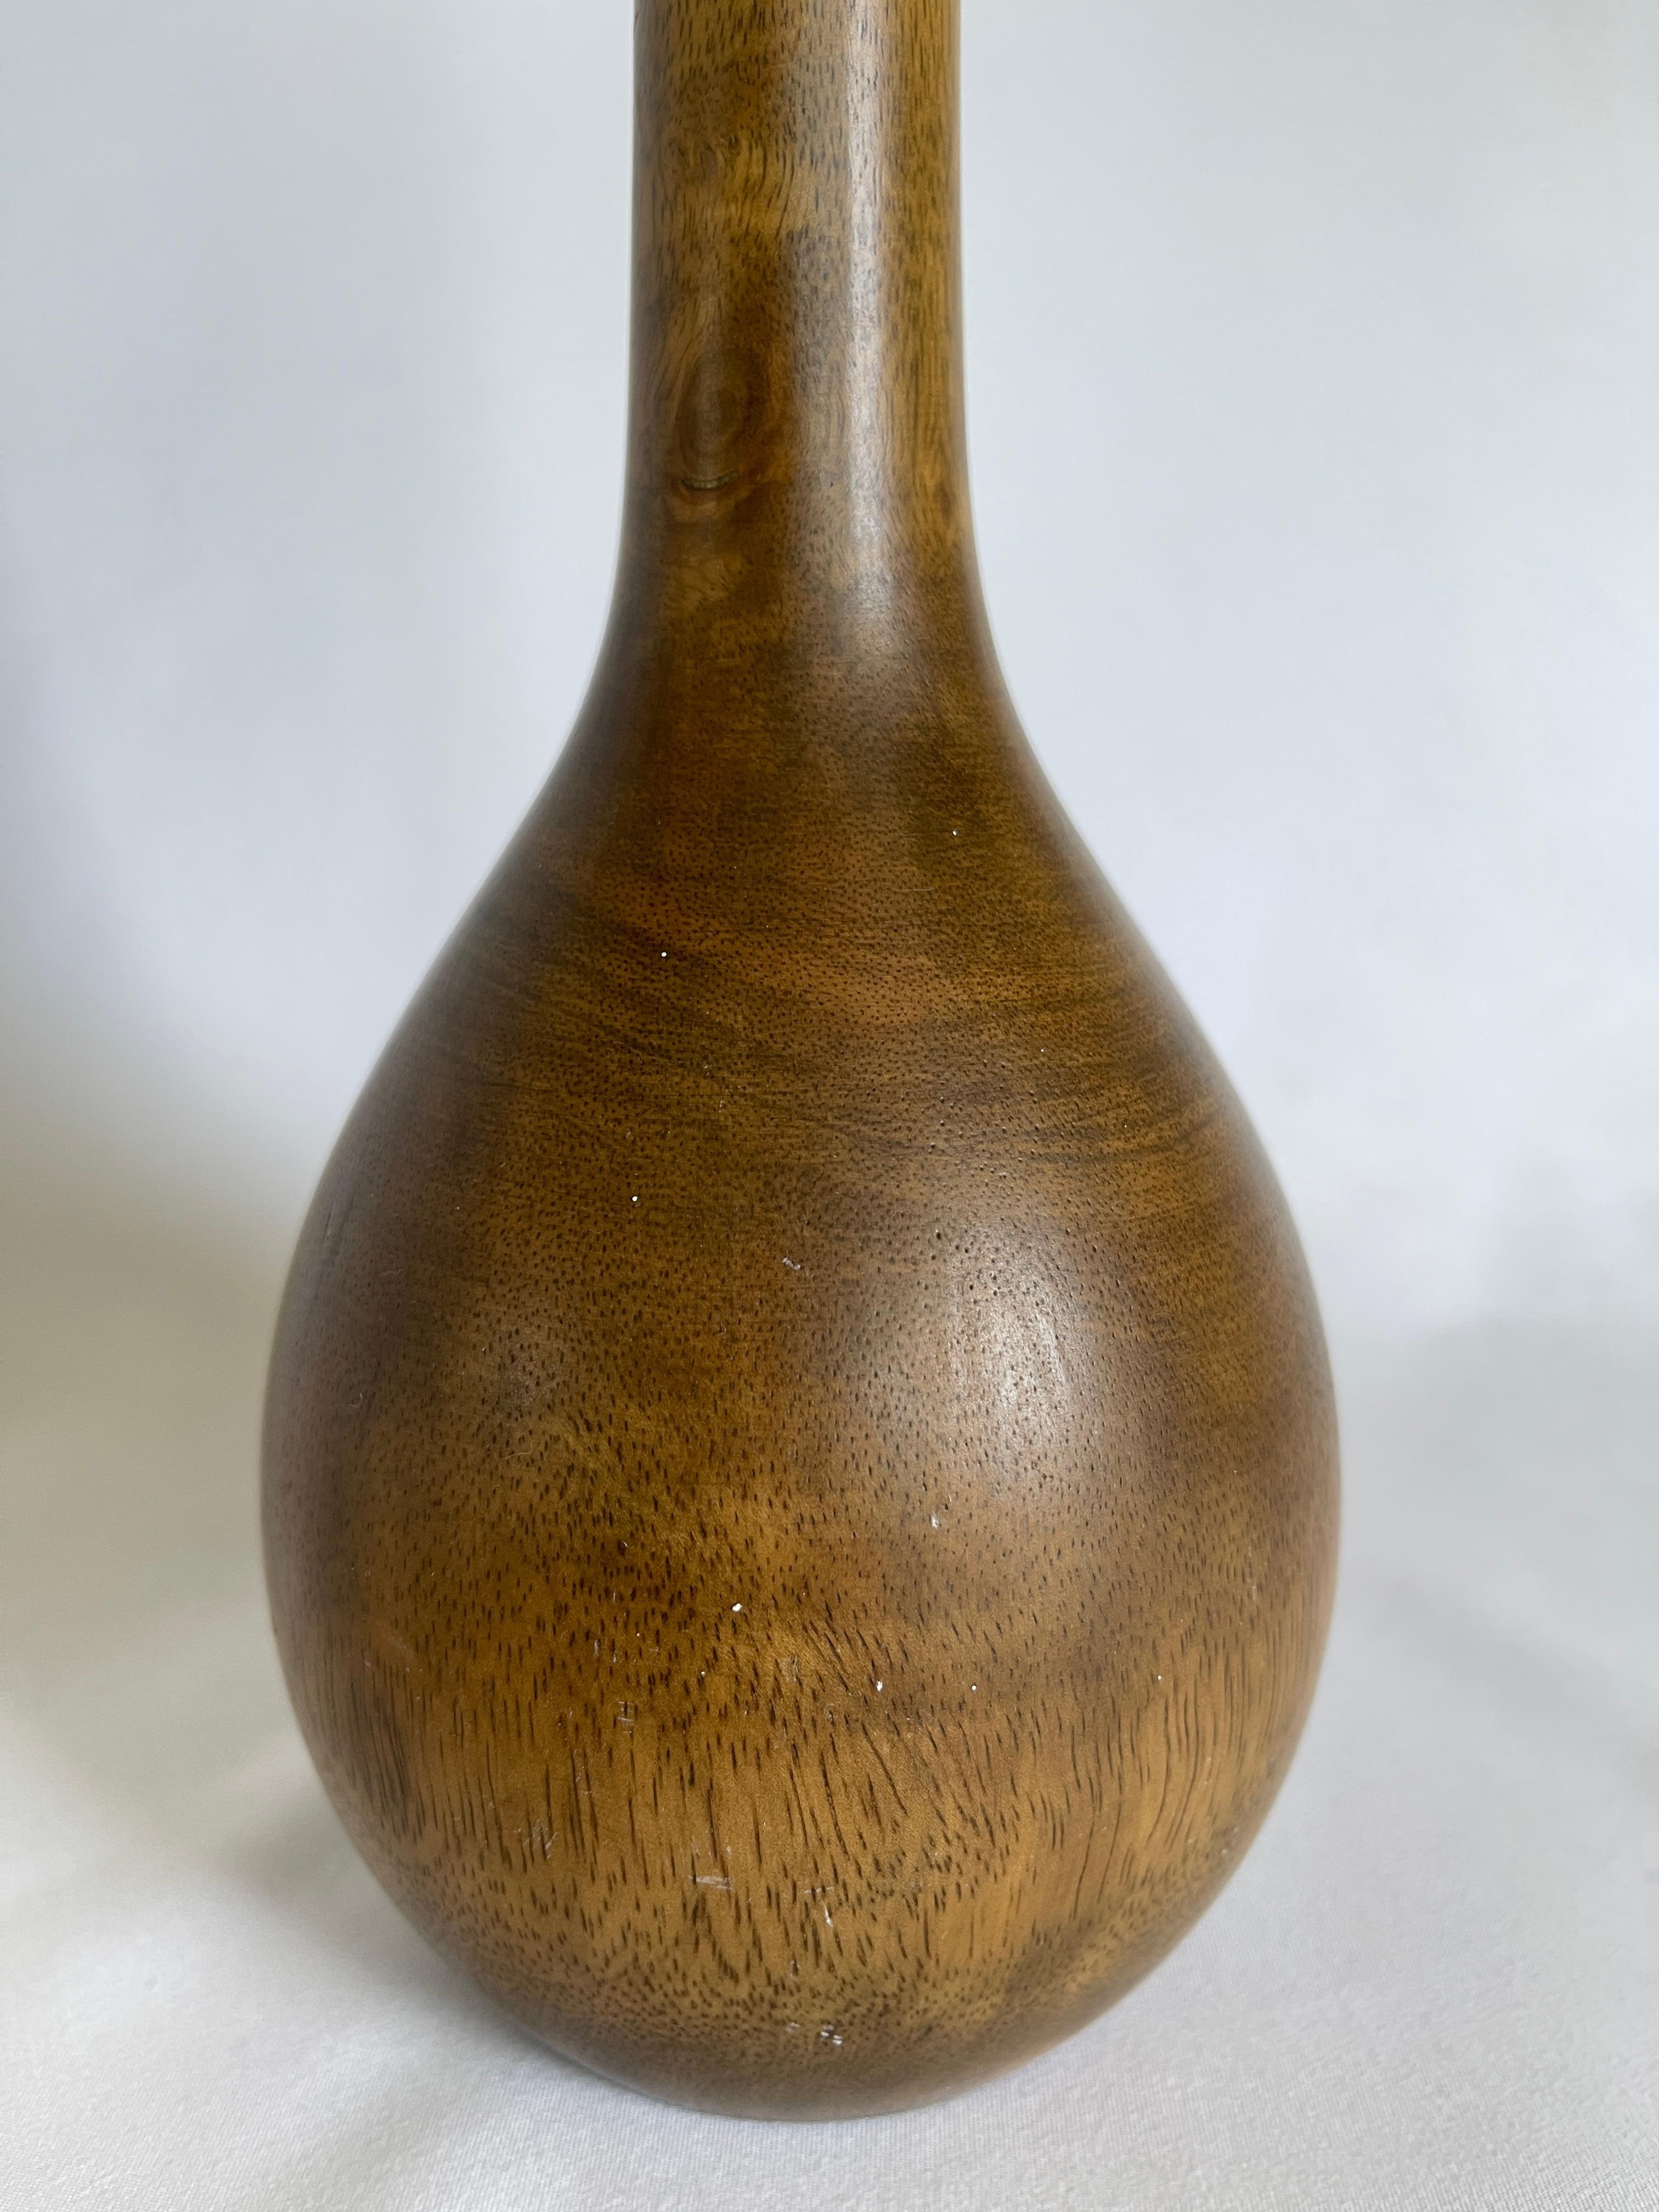 Tall walnut sculpture bottle vase hand turned on lathe, attributed to Phillip Lloyd Powell of the New Hope School, Pennsylvania.